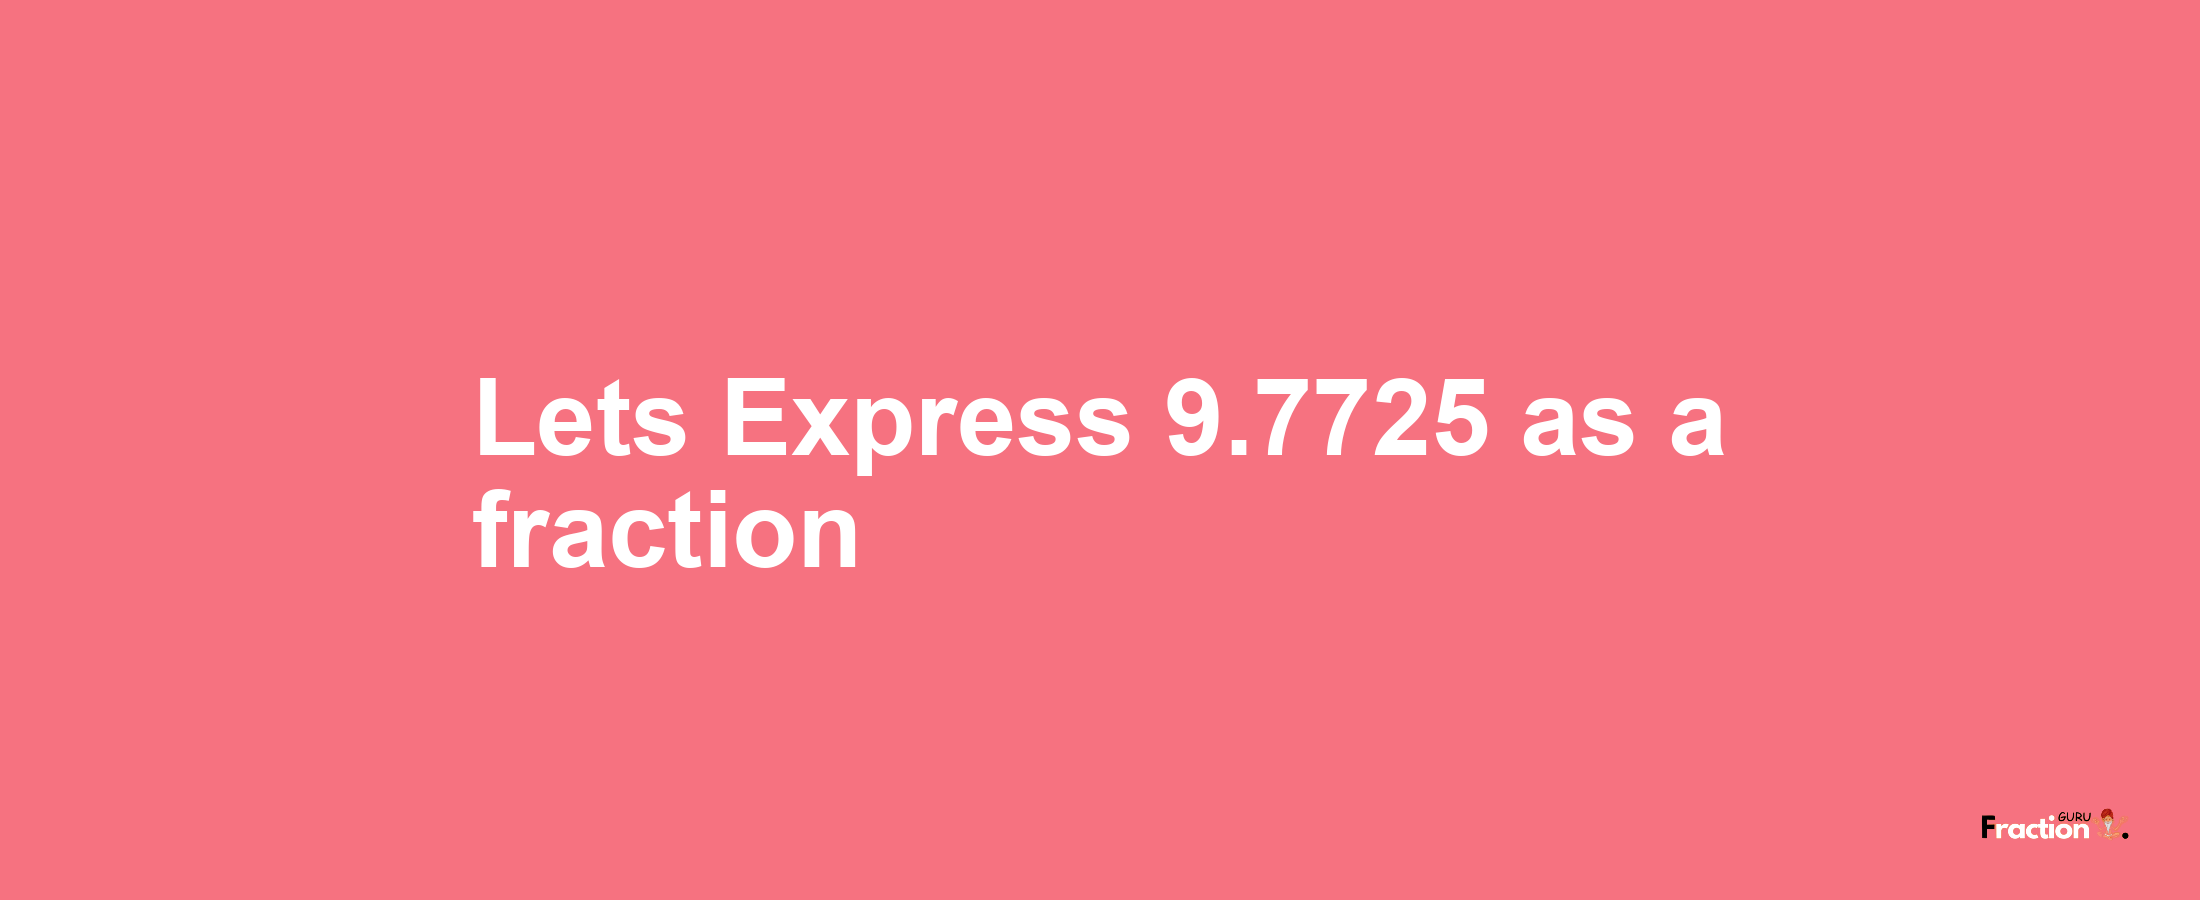 Lets Express 9.7725 as afraction